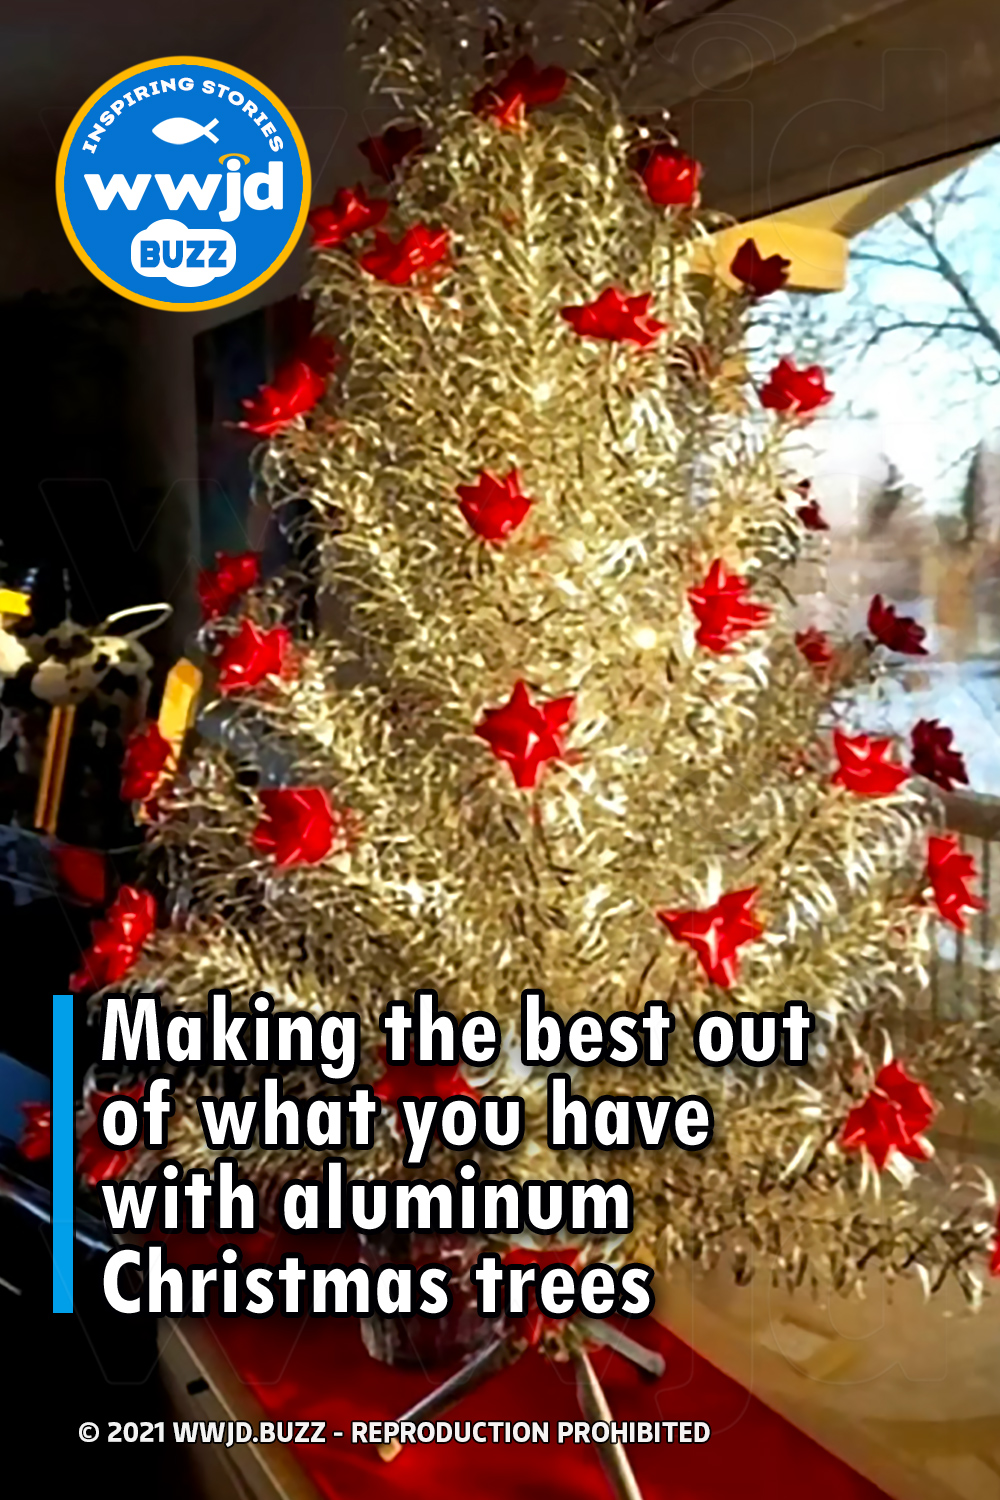 Making the best out of what you have with aluminum Christmas trees